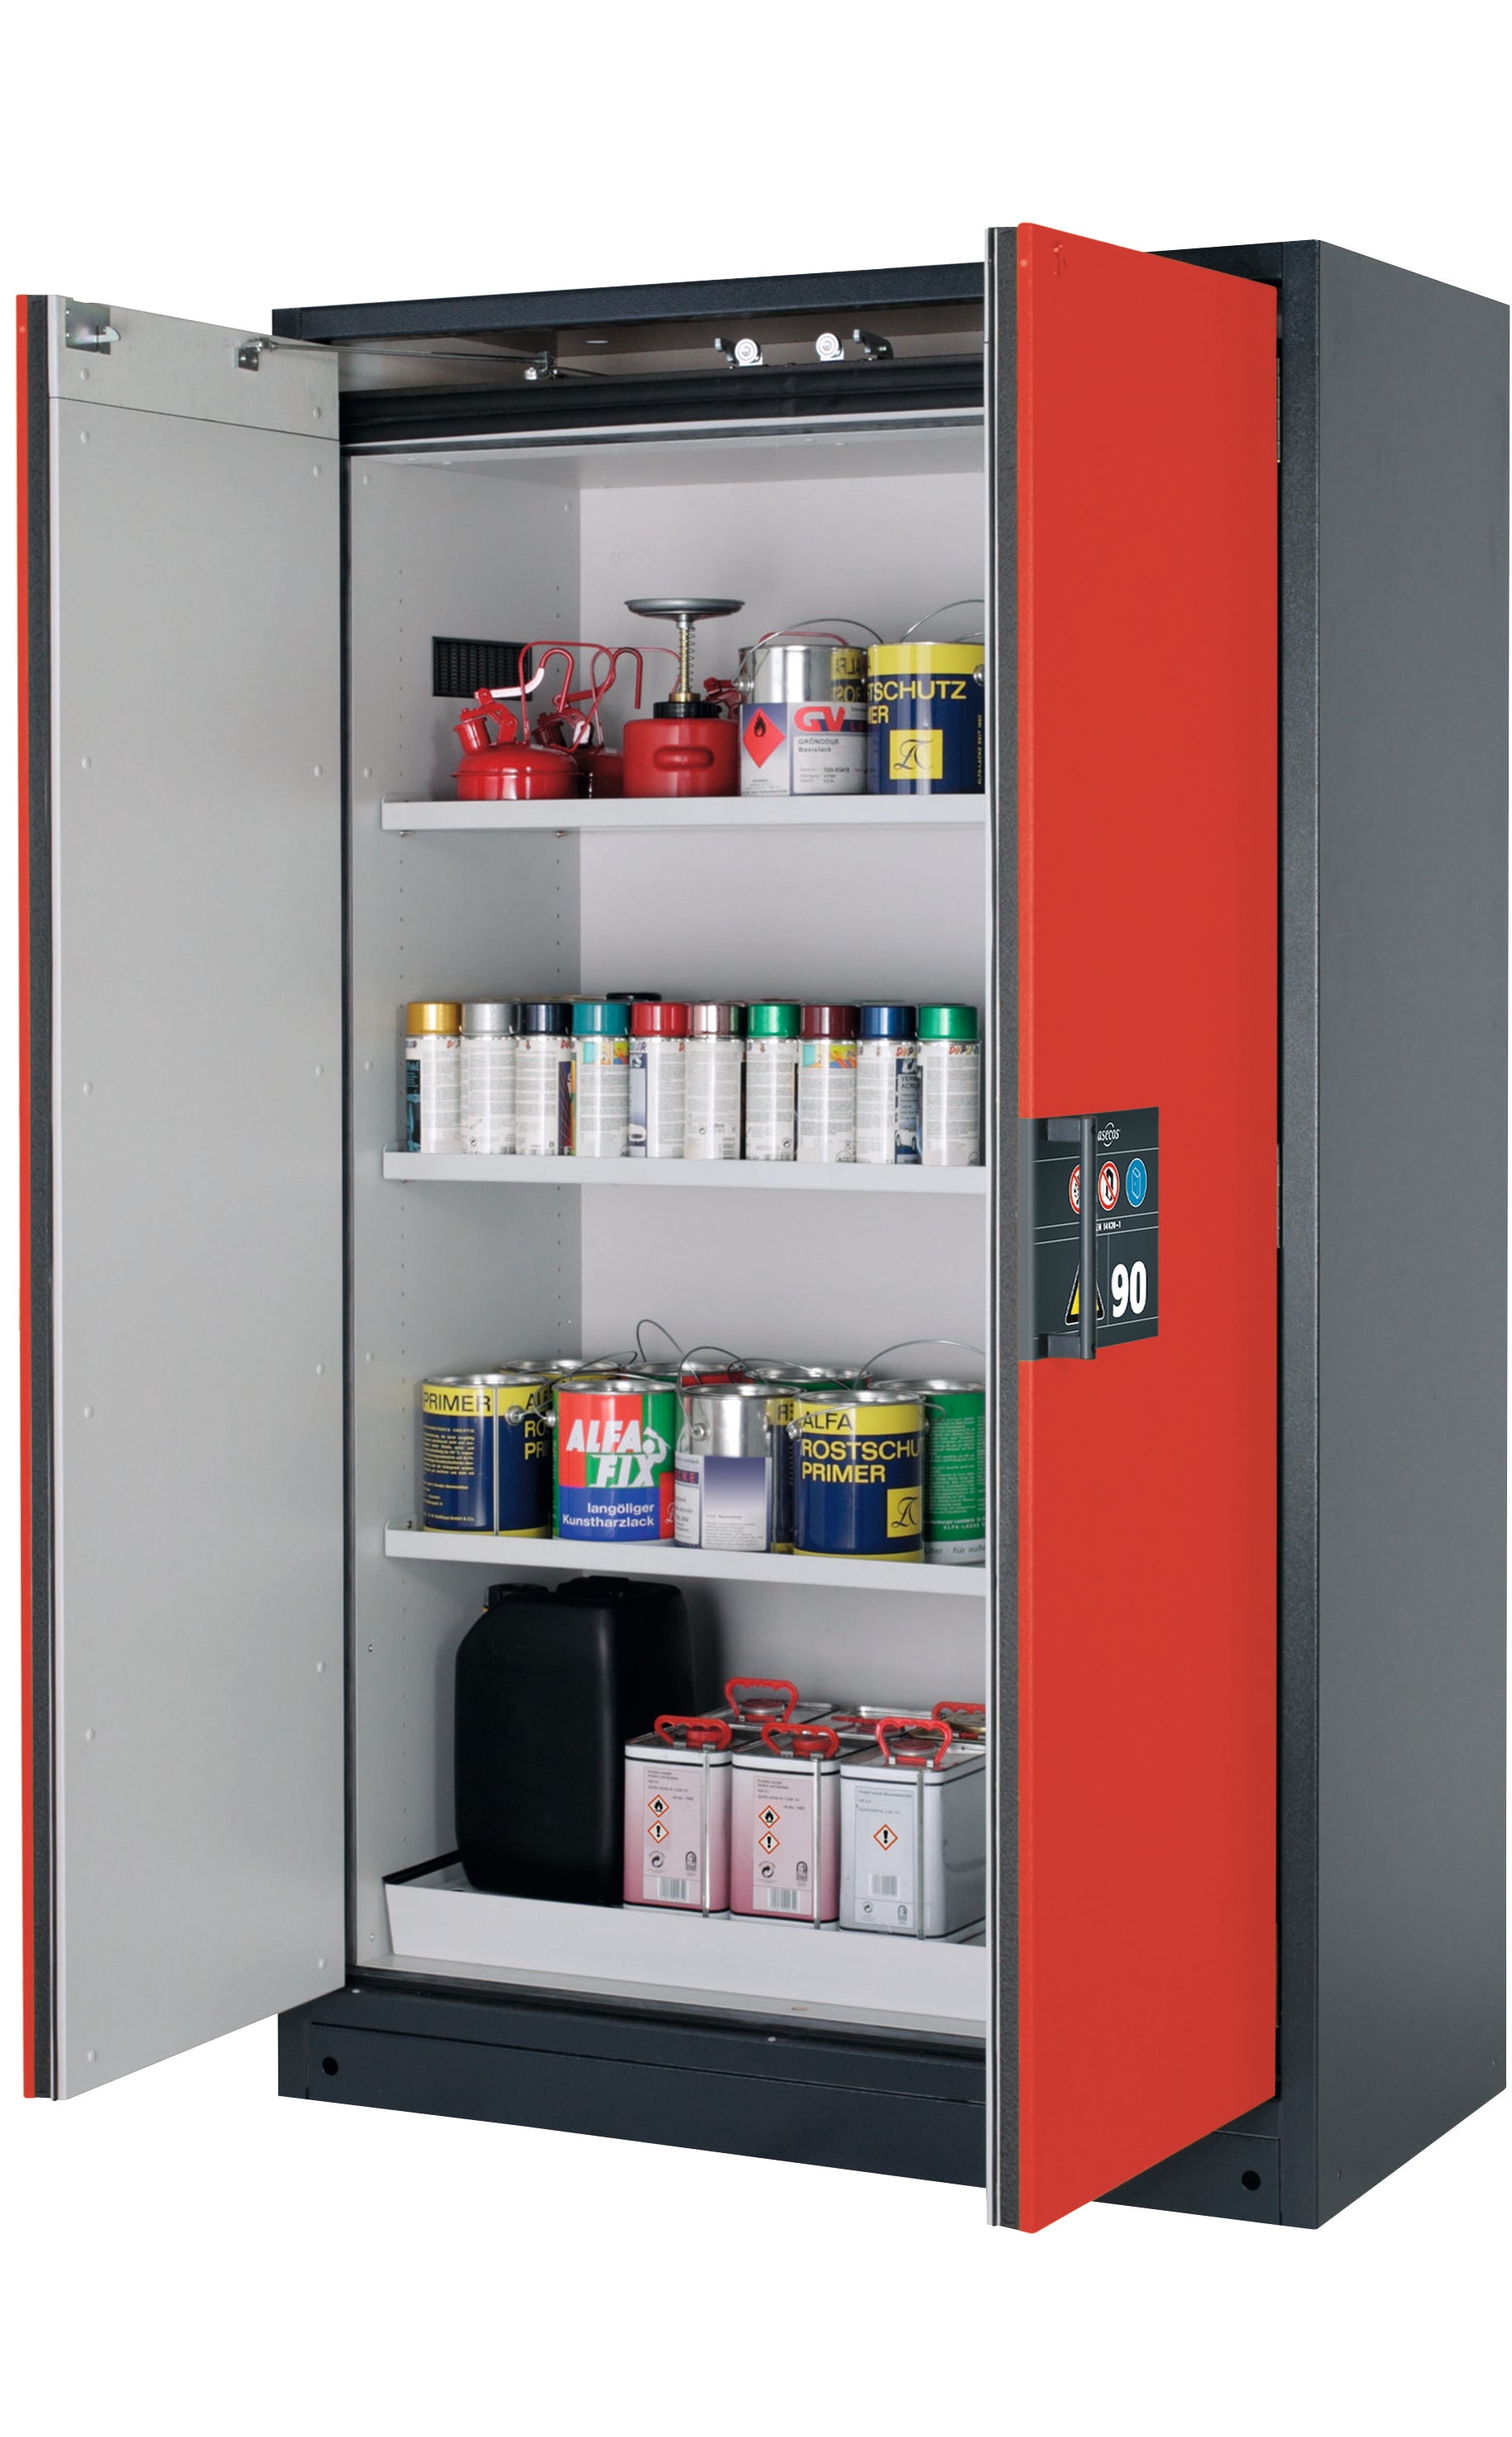 Type 90 safety storage cabinet Q-CLASSIC-90 model Q90.195.120 in traffic red RAL 3020 with 3x shelf standard (sheet steel),